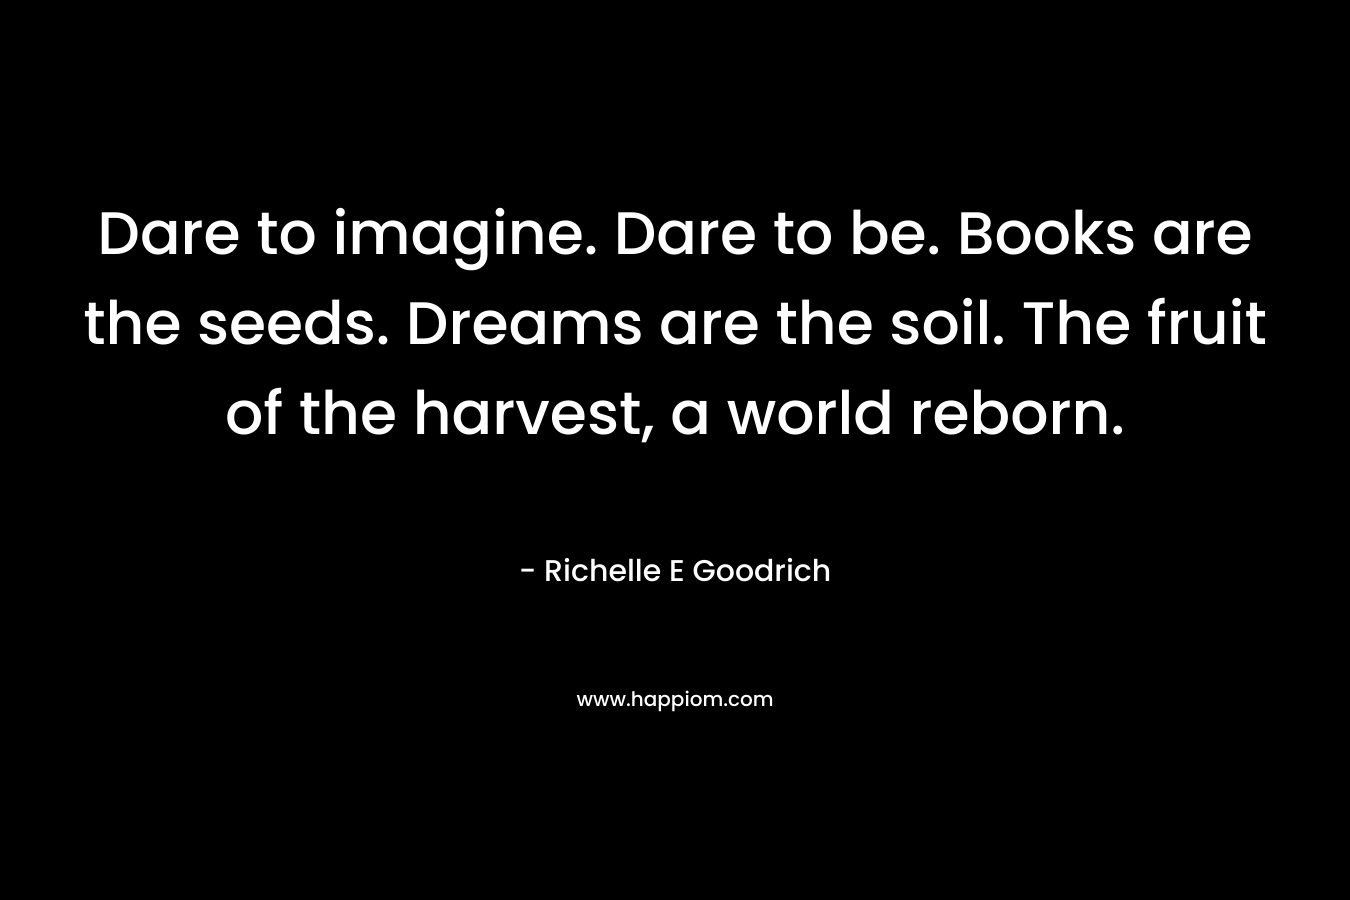 Dare to imagine. Dare to be. Books are the seeds. Dreams are the soil. The fruit of the harvest, a world reborn. – Richelle E Goodrich